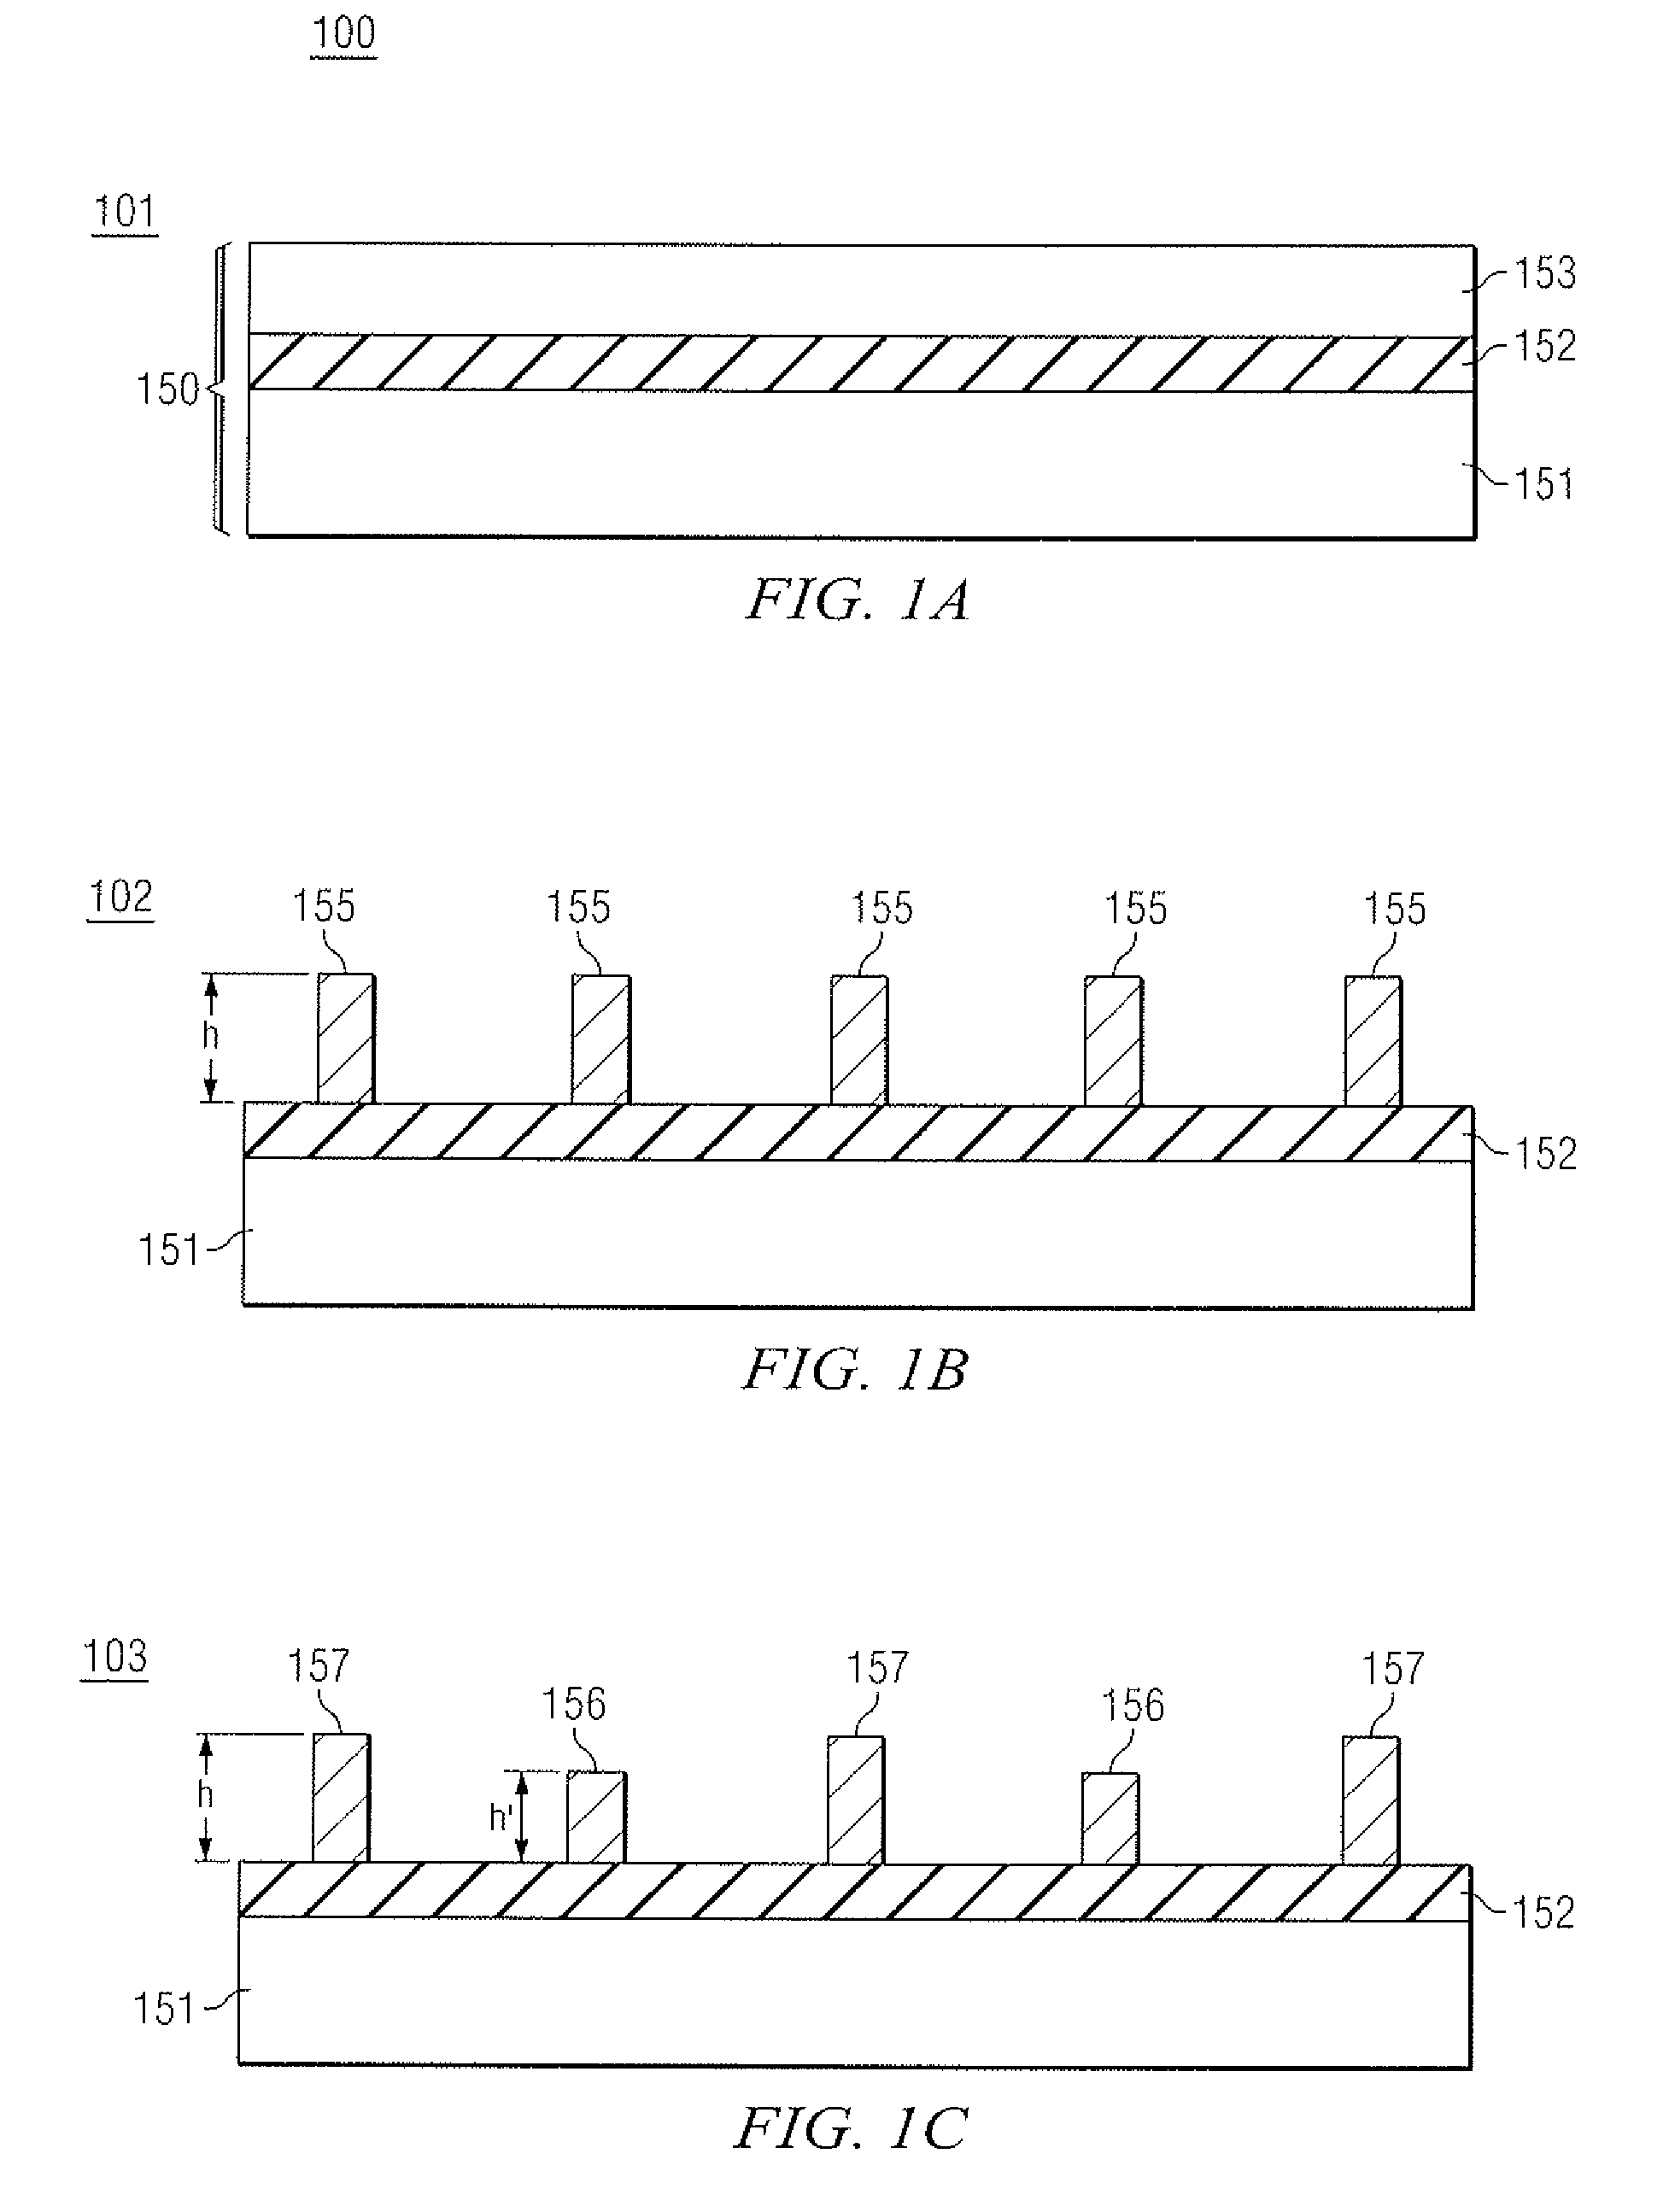 Process for forming both split gate and common gate finfet transistors and integrated circuits therefrom